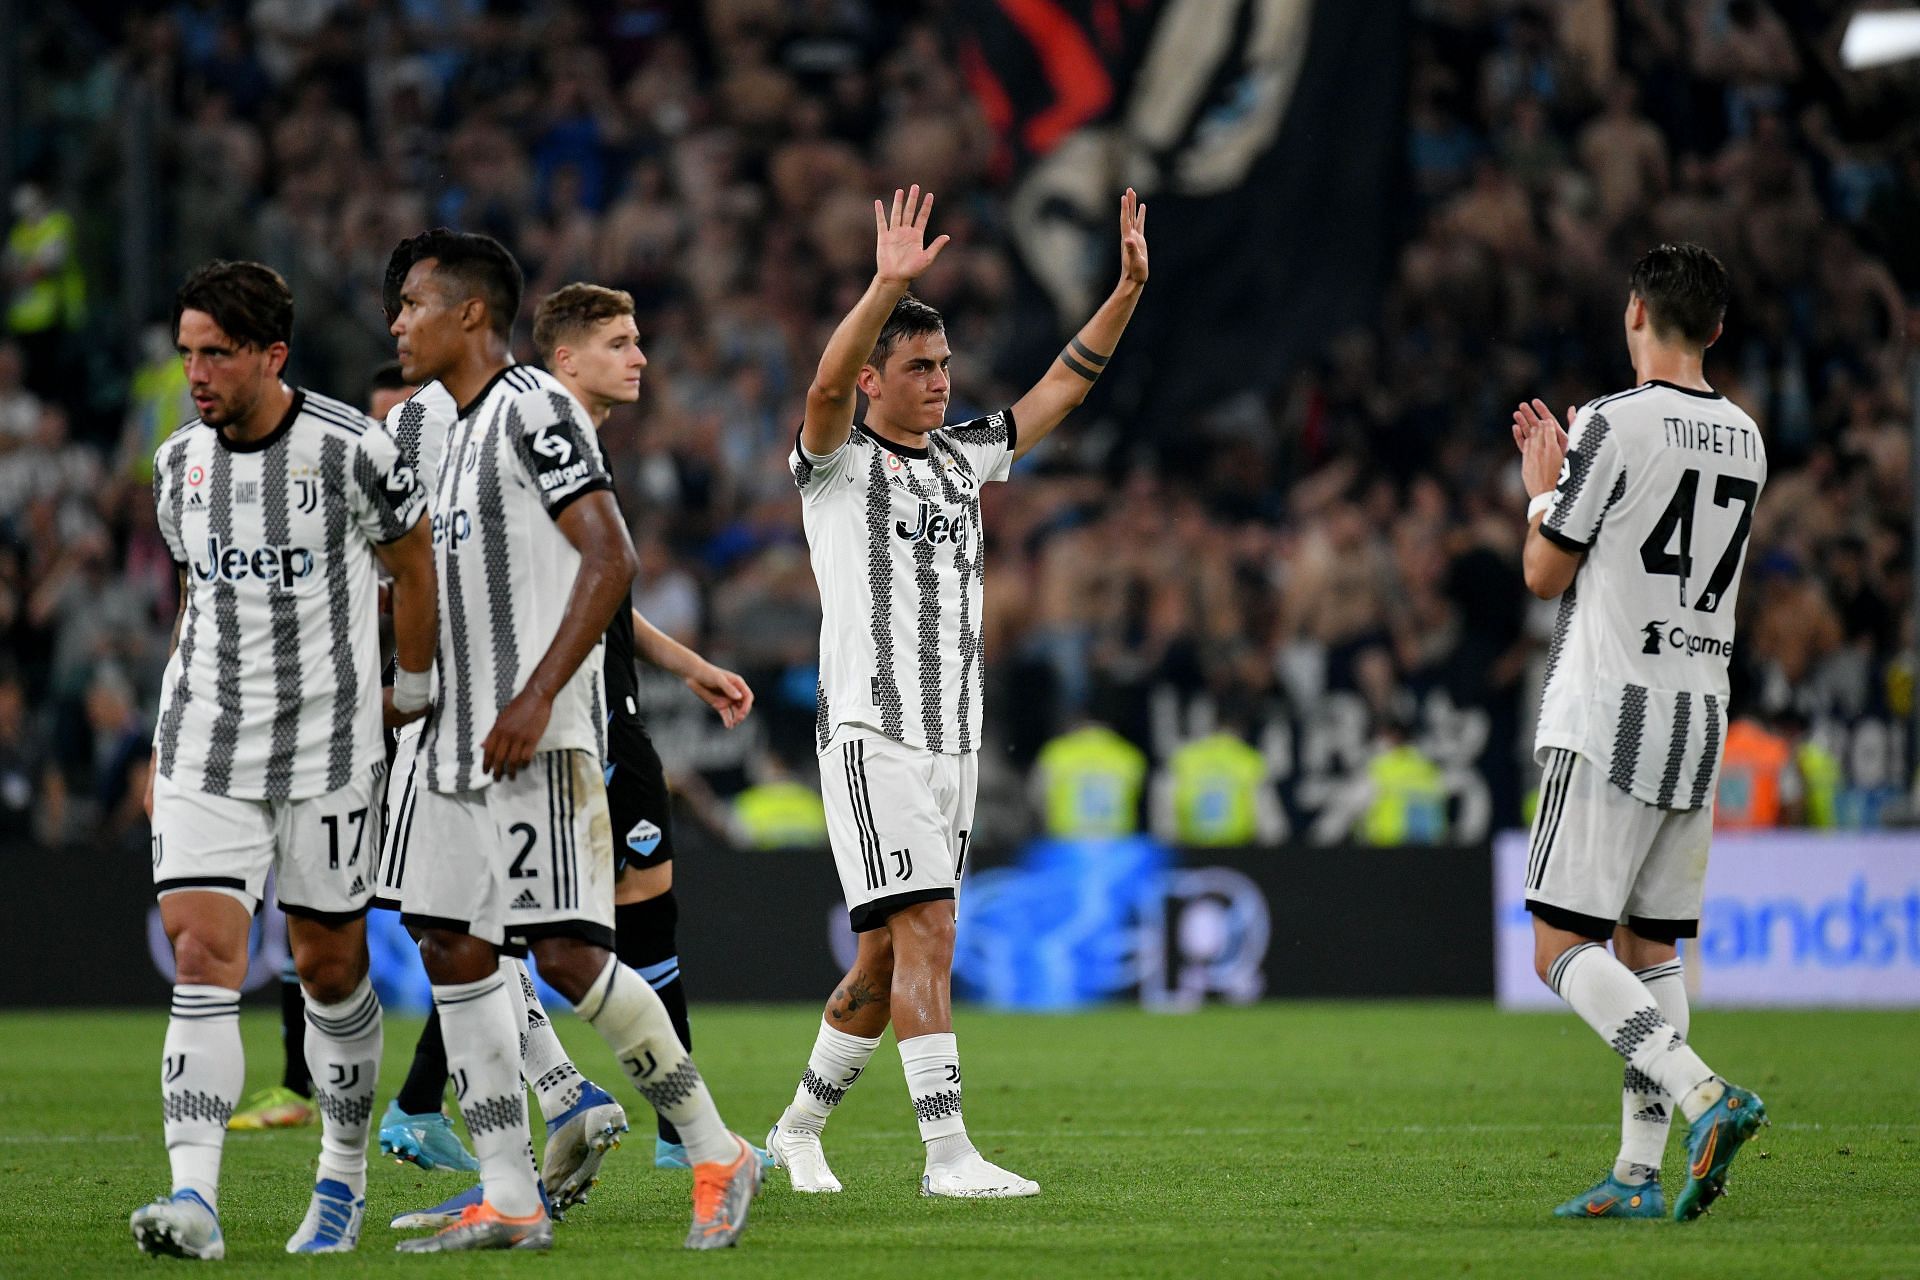 Juventus are one of the biggest teams in Europe